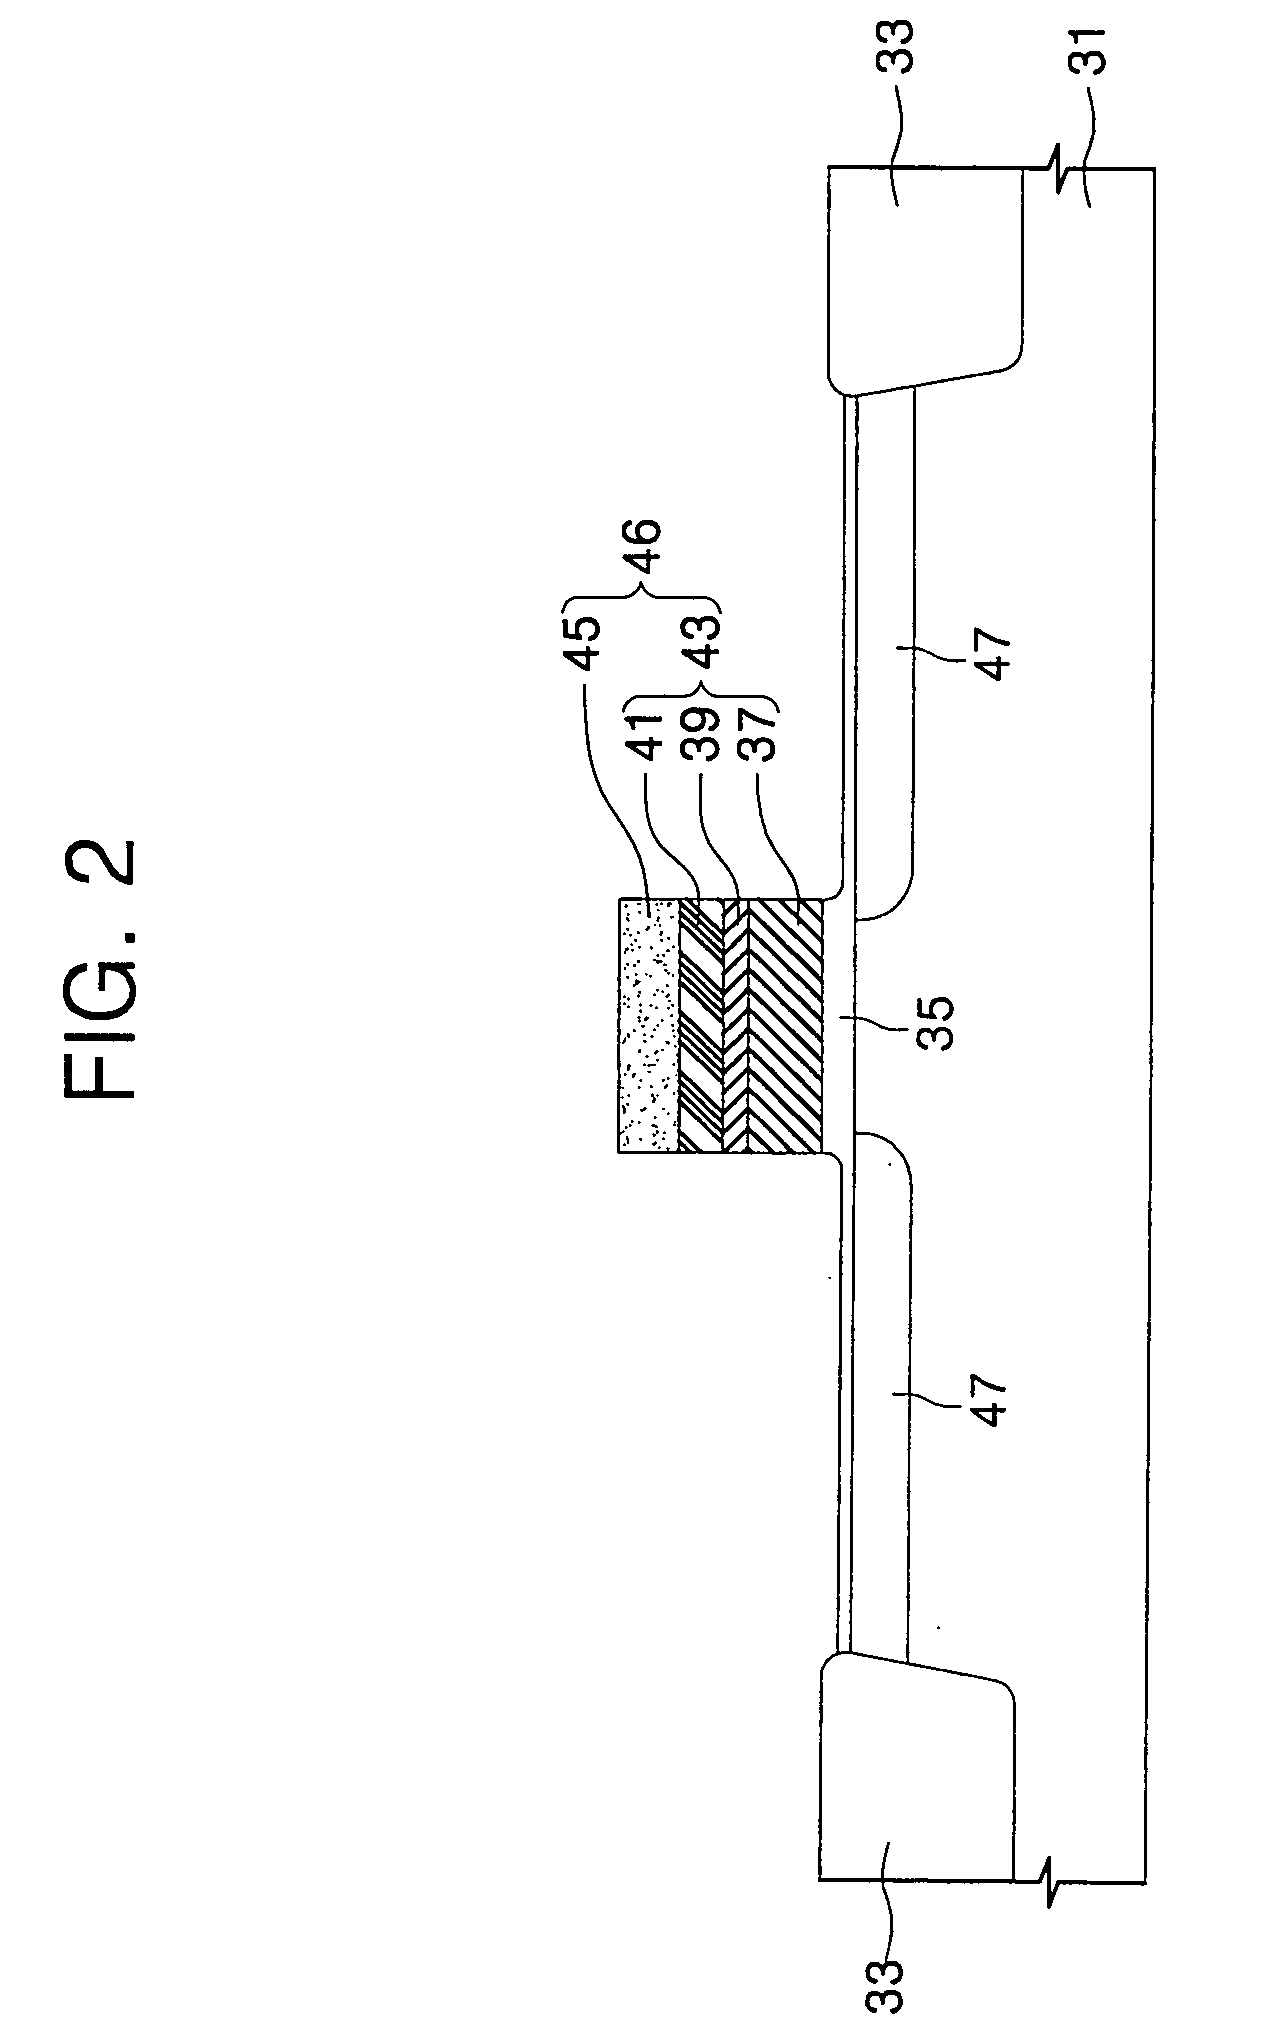 Nickel salicide processes and methods of fabricating semiconductor devices using the same